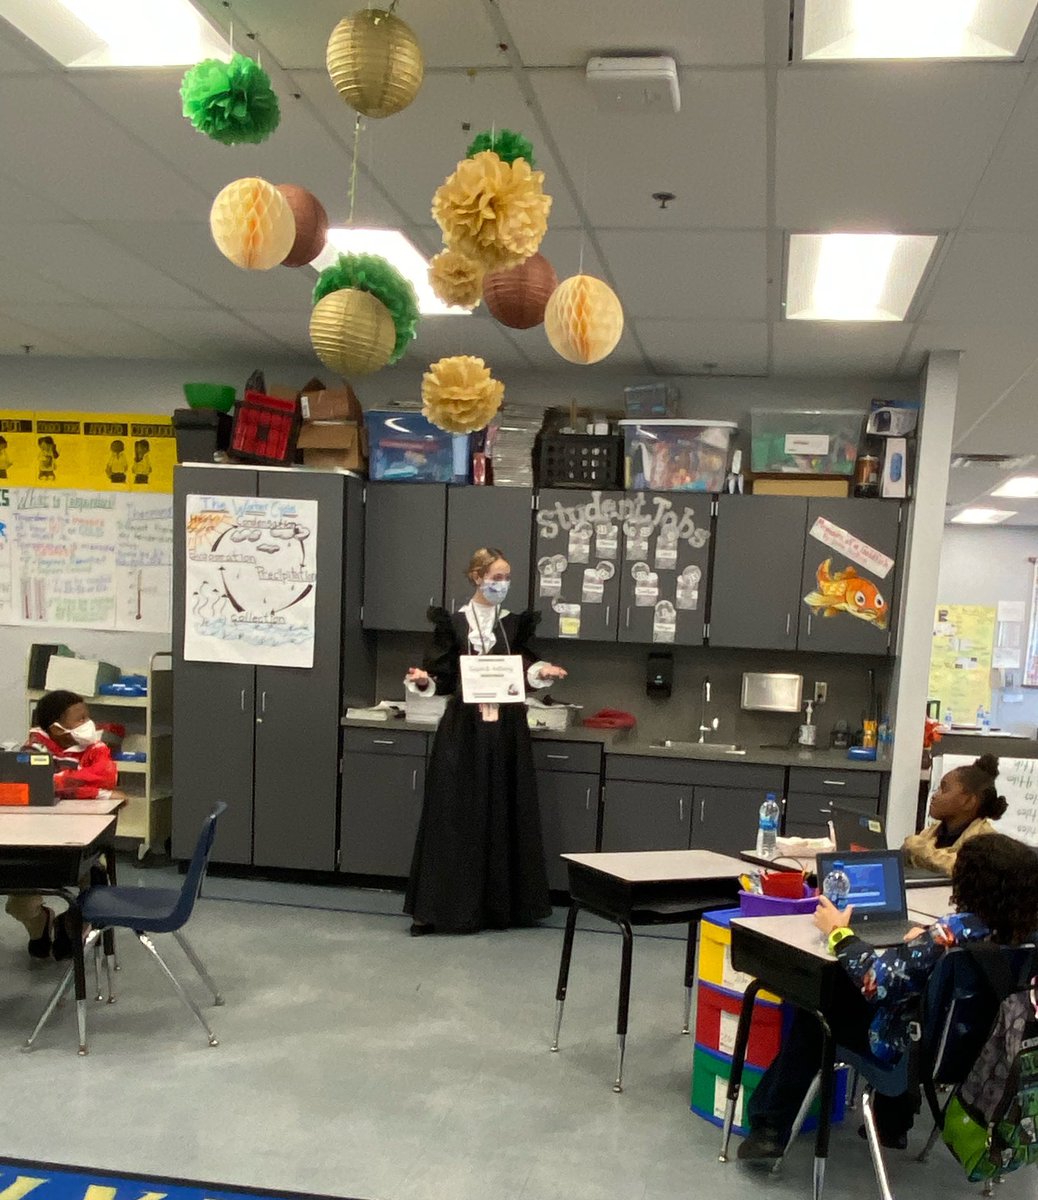 Susan B. Anthony came! Great discussions with 2nd grade of how she made a difference then and what we see now! @CSnyds86 @oakparklions #WomensHistoryMonth